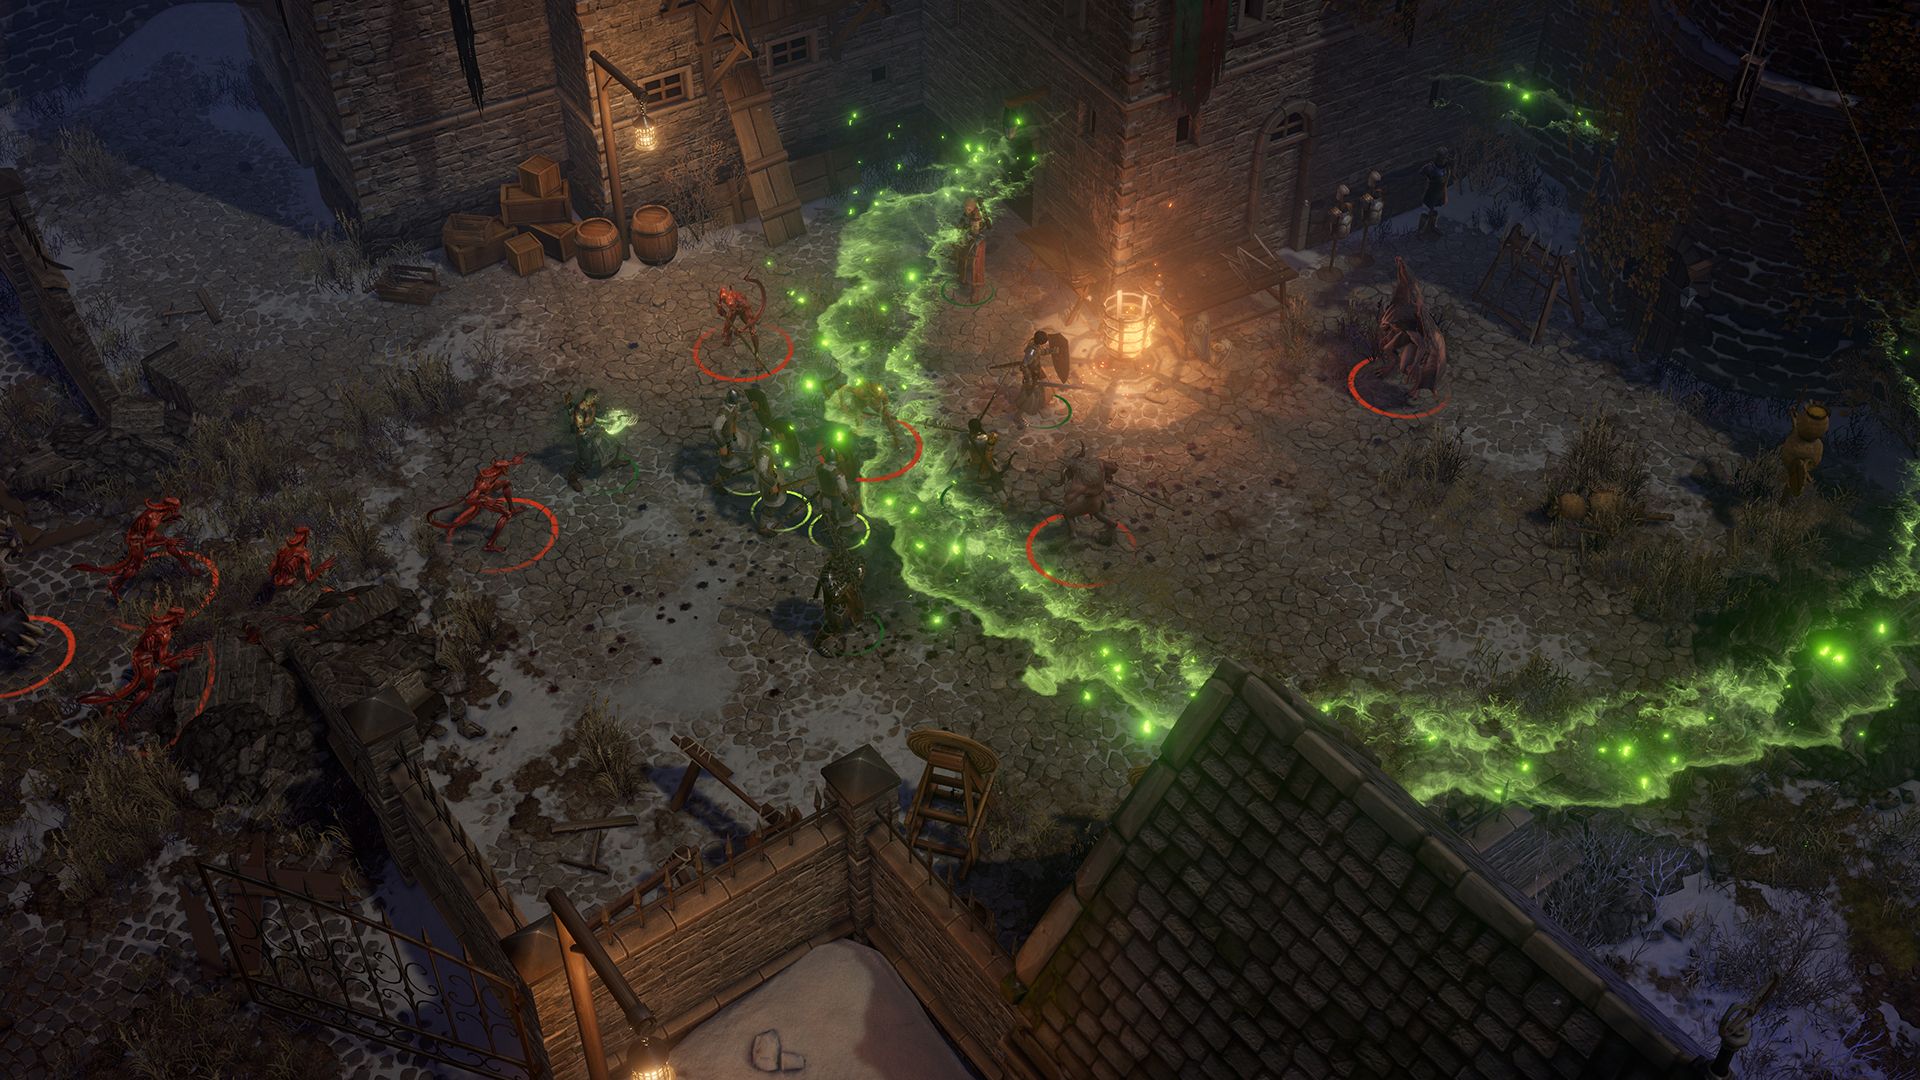 Pathfinder: Kingmaker Plus Edition: Wrath of the Righteous Kickstarter Launches February 4th